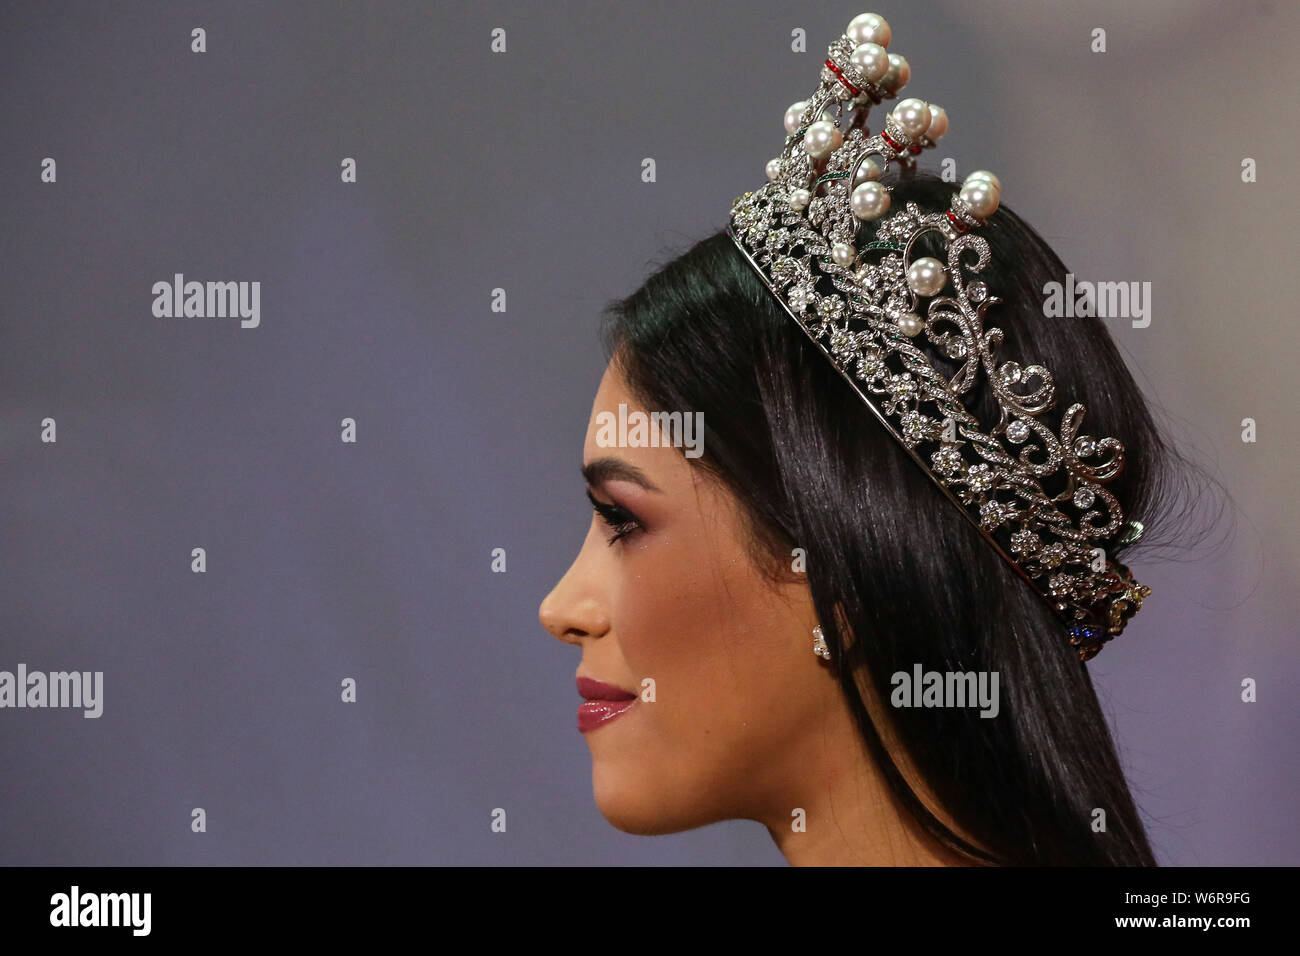 Caracas, Venezuela. 02nd Aug, 2019. Melissa Jimendez from the state of Zulia smiles at a press conference. The 20-year-old is supposed to wear the sash at the Miss Universe competition. Venezuela is a superpower in international business with beauty. Seven Miss Universe and six Miss World come from the South American country. At the same time, however, the country is experiencing a severe political and economic crisis. Millions of Venezuelans have already left their homes. Credit: Pedro Ramses Mattey/dpa/Alamy Live News Stock Photo